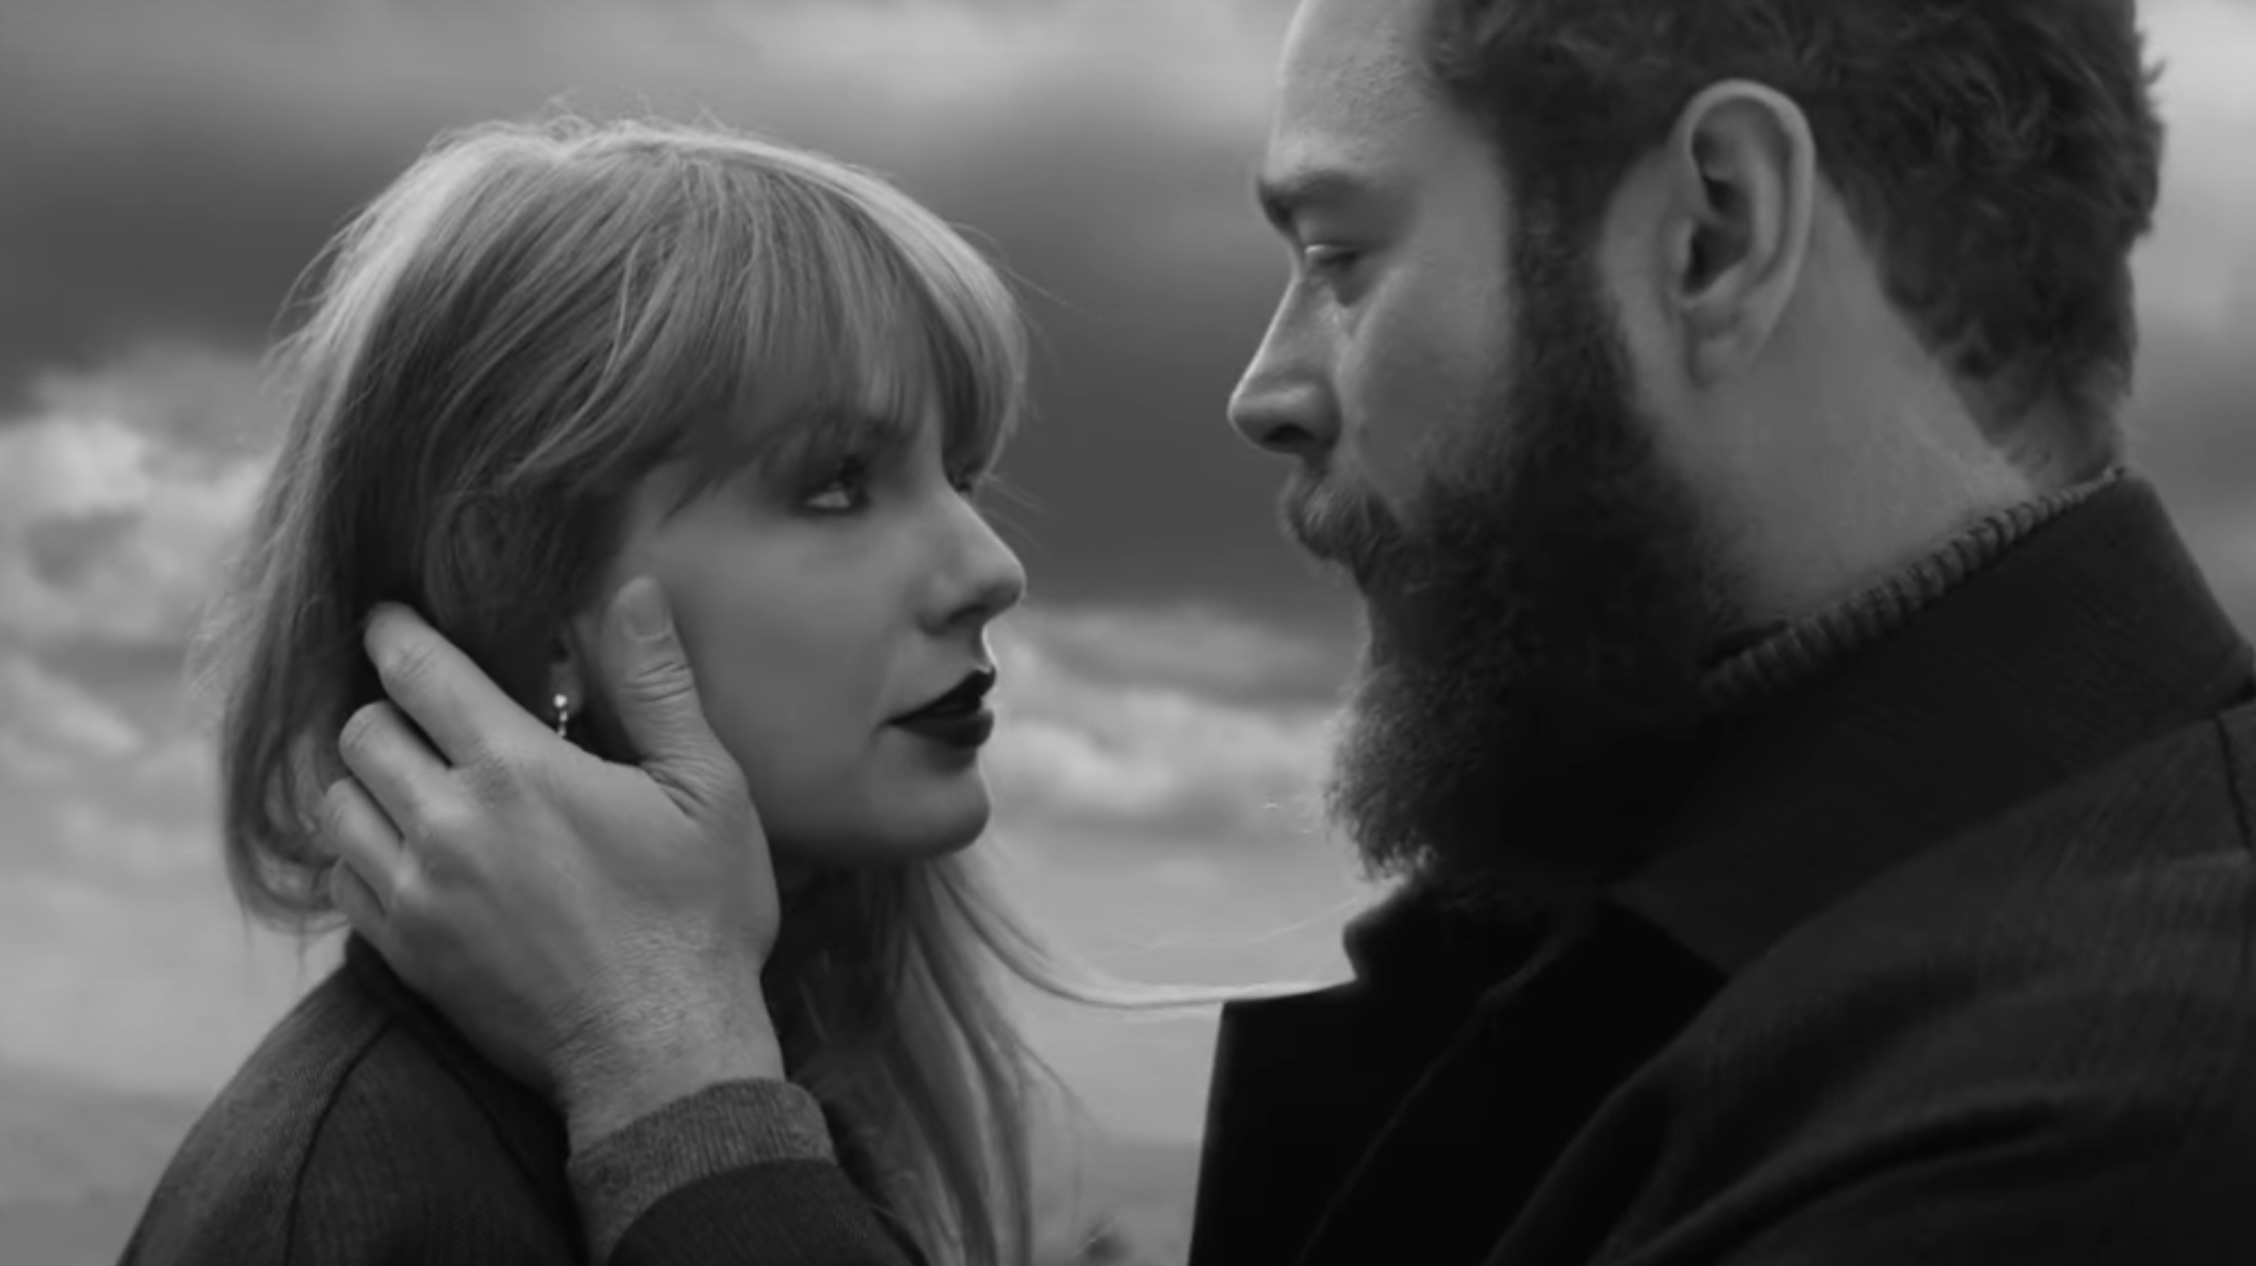 Hot 100: Taylor Swift & Post Malone’s ‘Fortnight’ Rules For Second Week